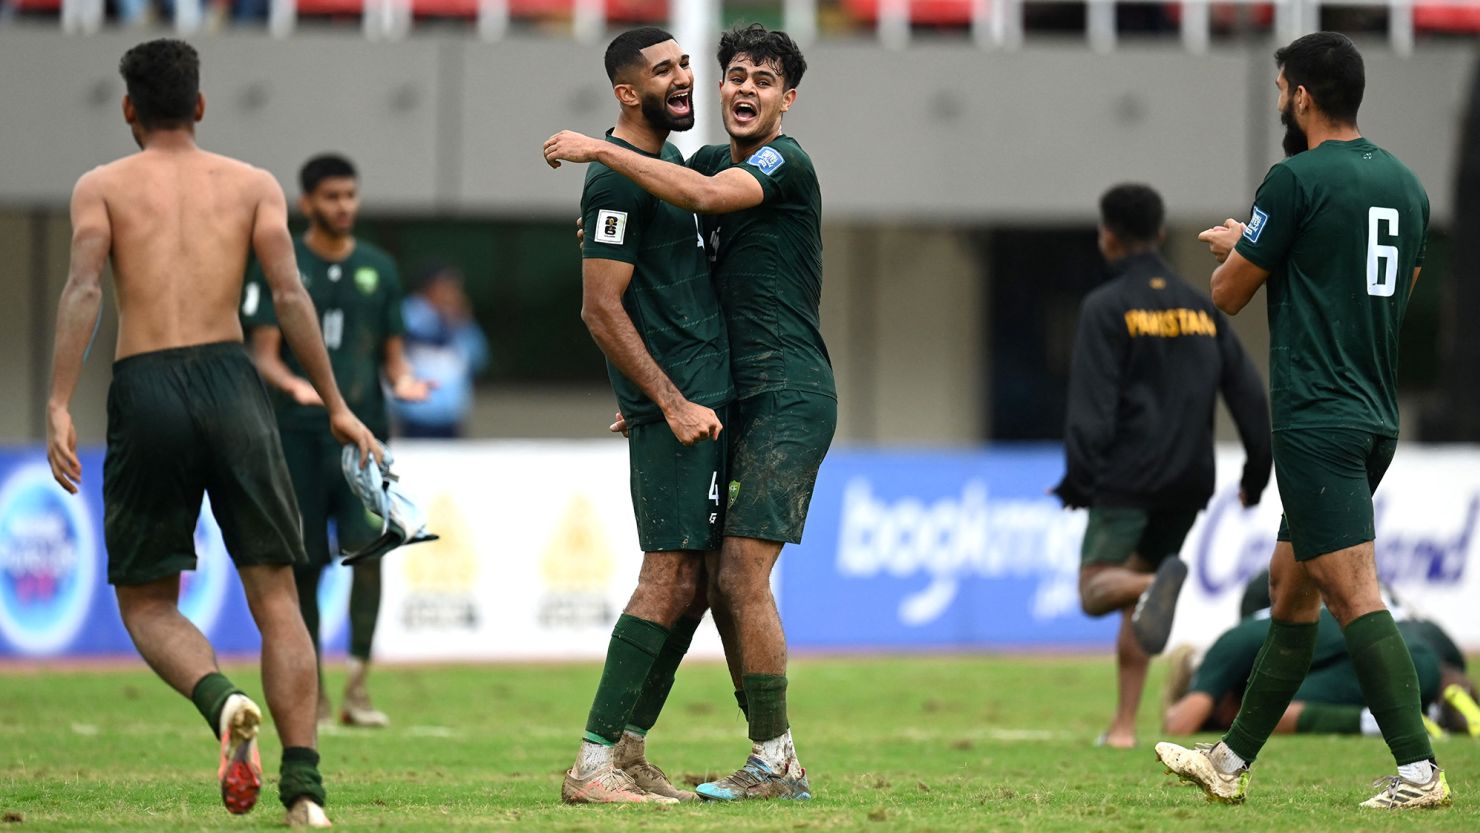 Pakistan's players celebrate their win at the 2026 FIFA World Cup qualifiers football match between Pakistan and Cambodia, at the Jinnah Sports stadium in Islamabad on October 17, 2023. (Photo by Aamir QURESHI / AFP) (Photo by AAMIR QURESHI/AFP via Getty Images)